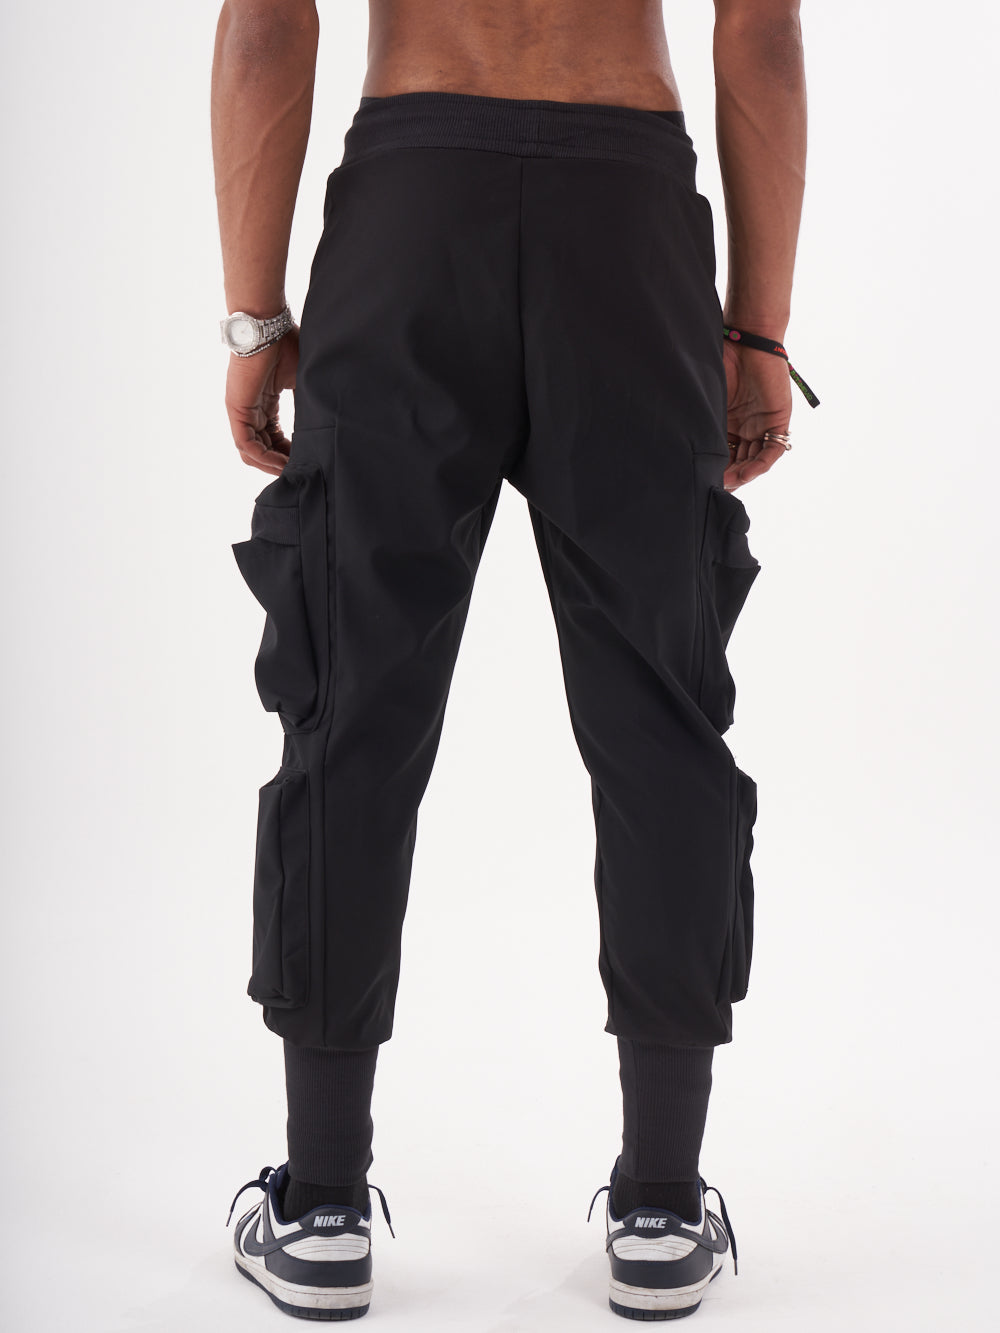 The back view of a man wearing OUTLIER JOGGERS | BLACK.